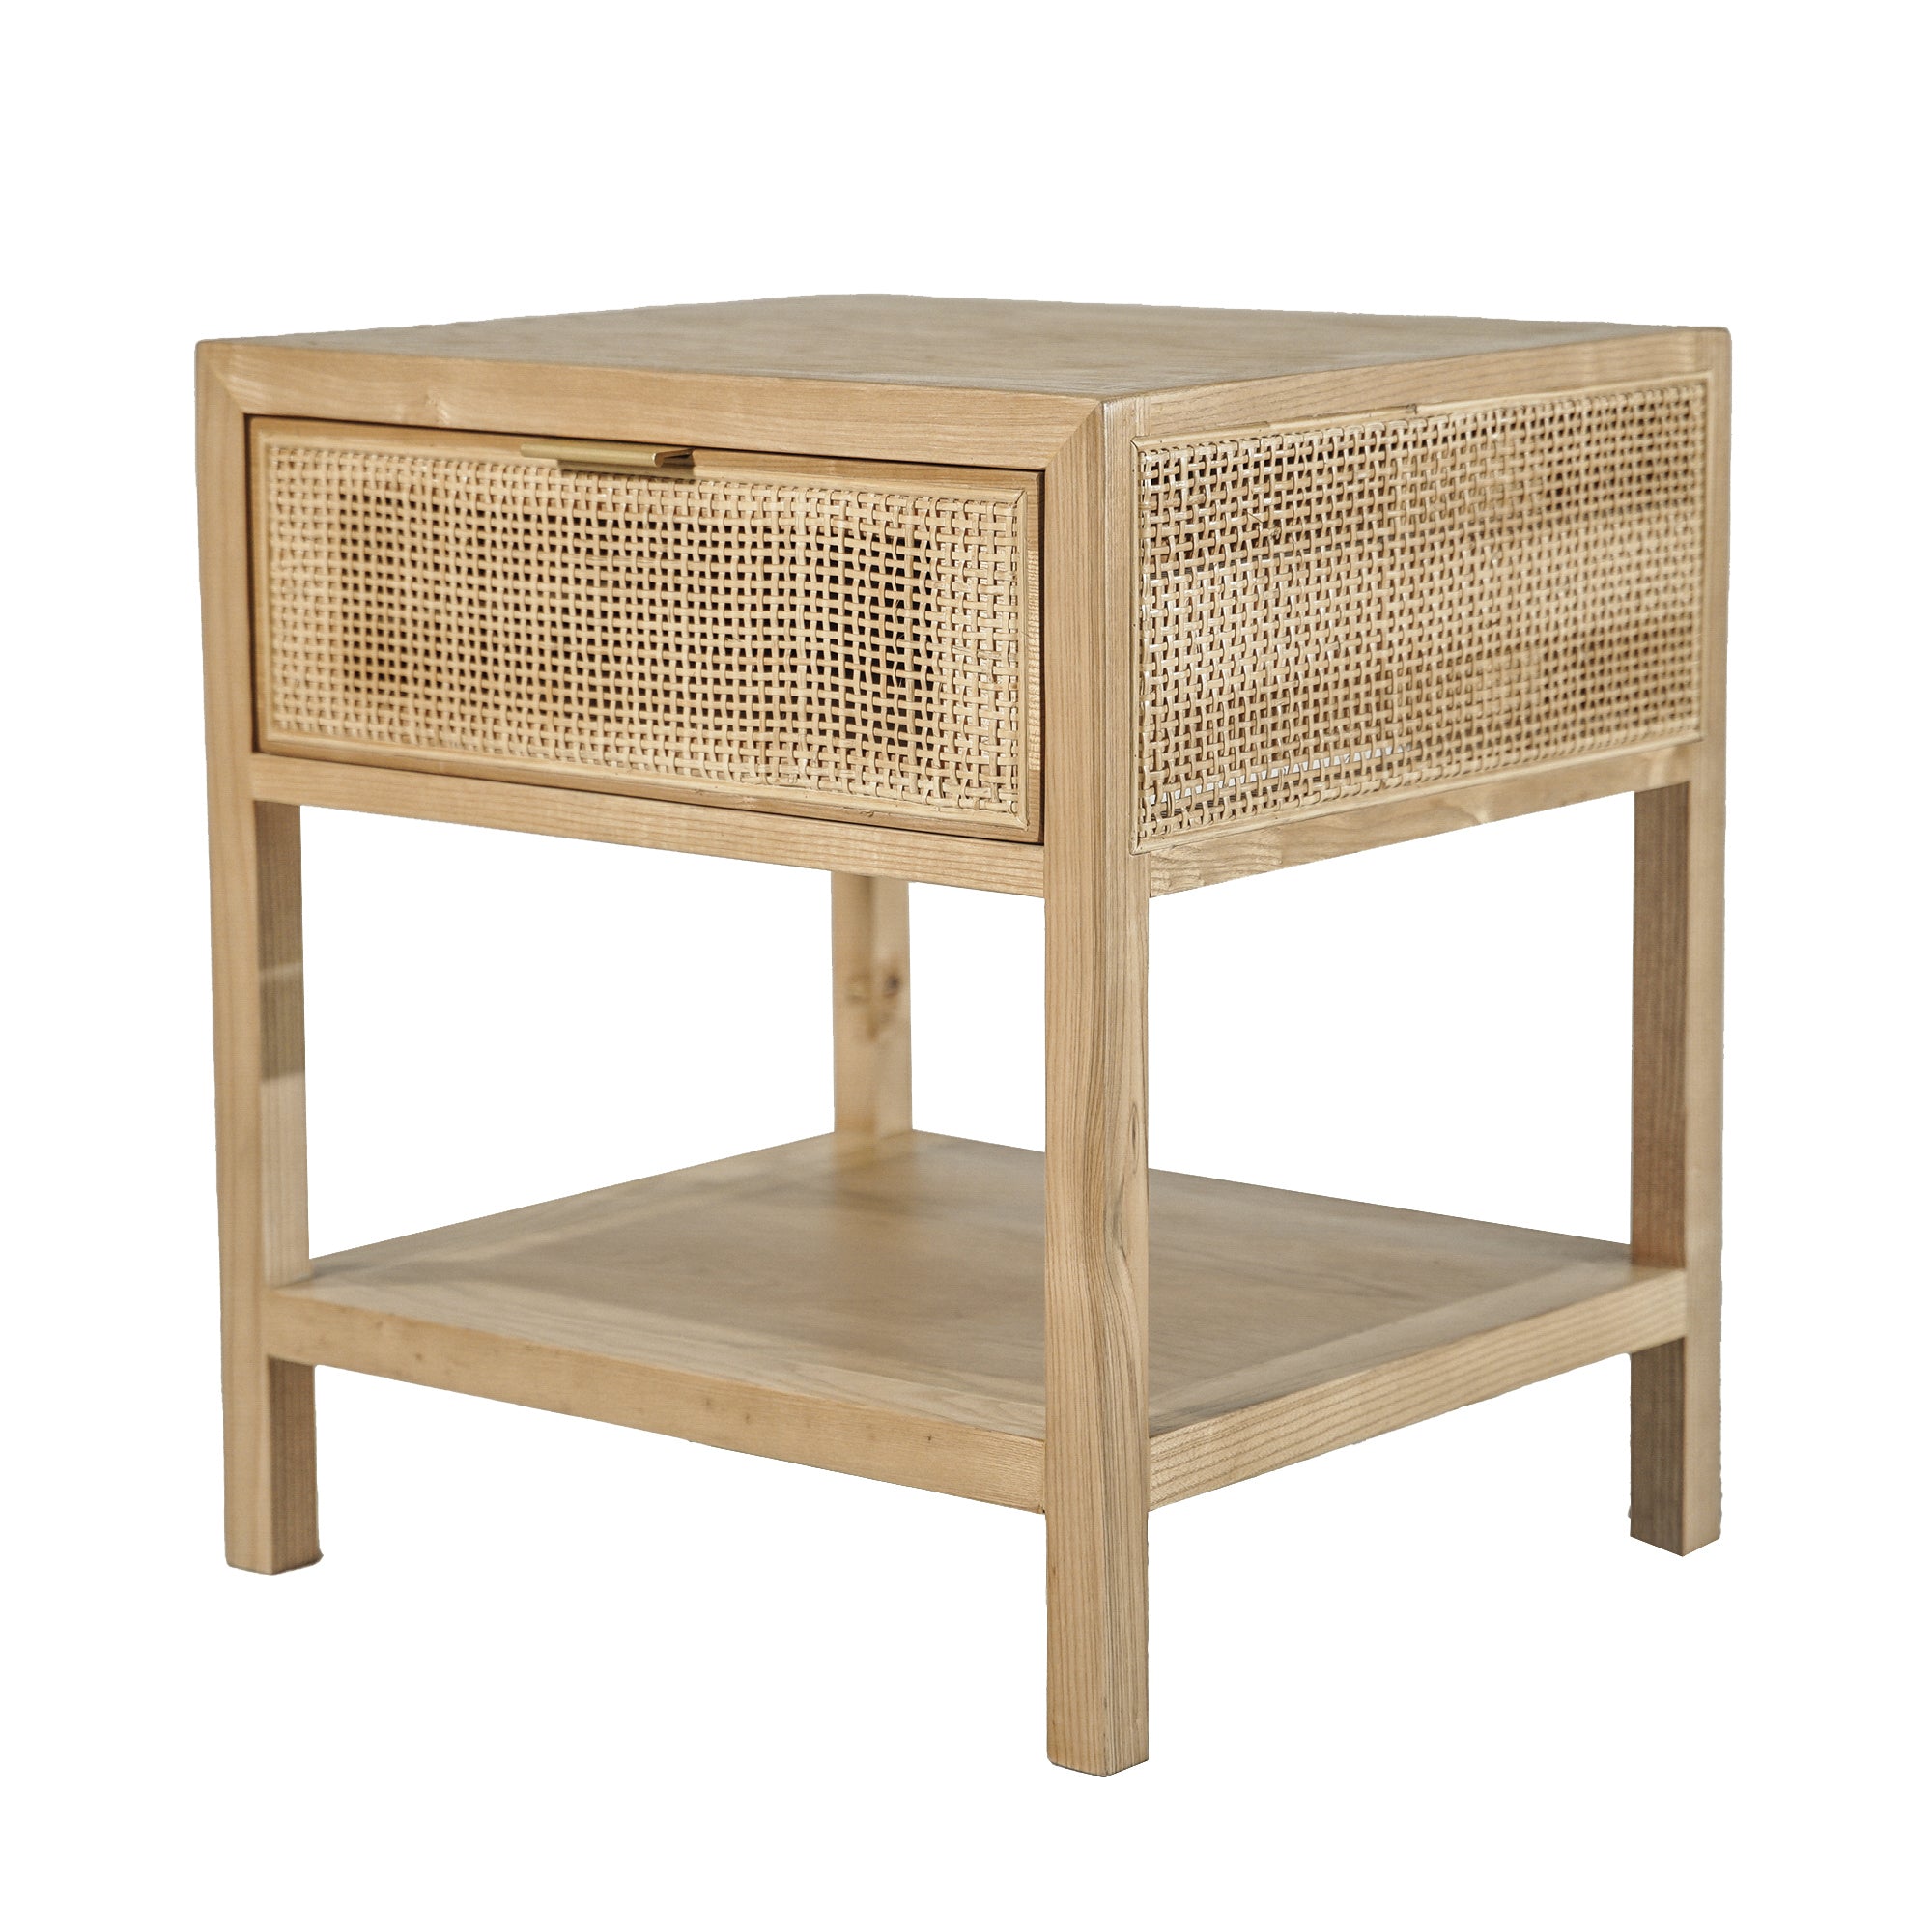 LH Imports, Rattana Side Table